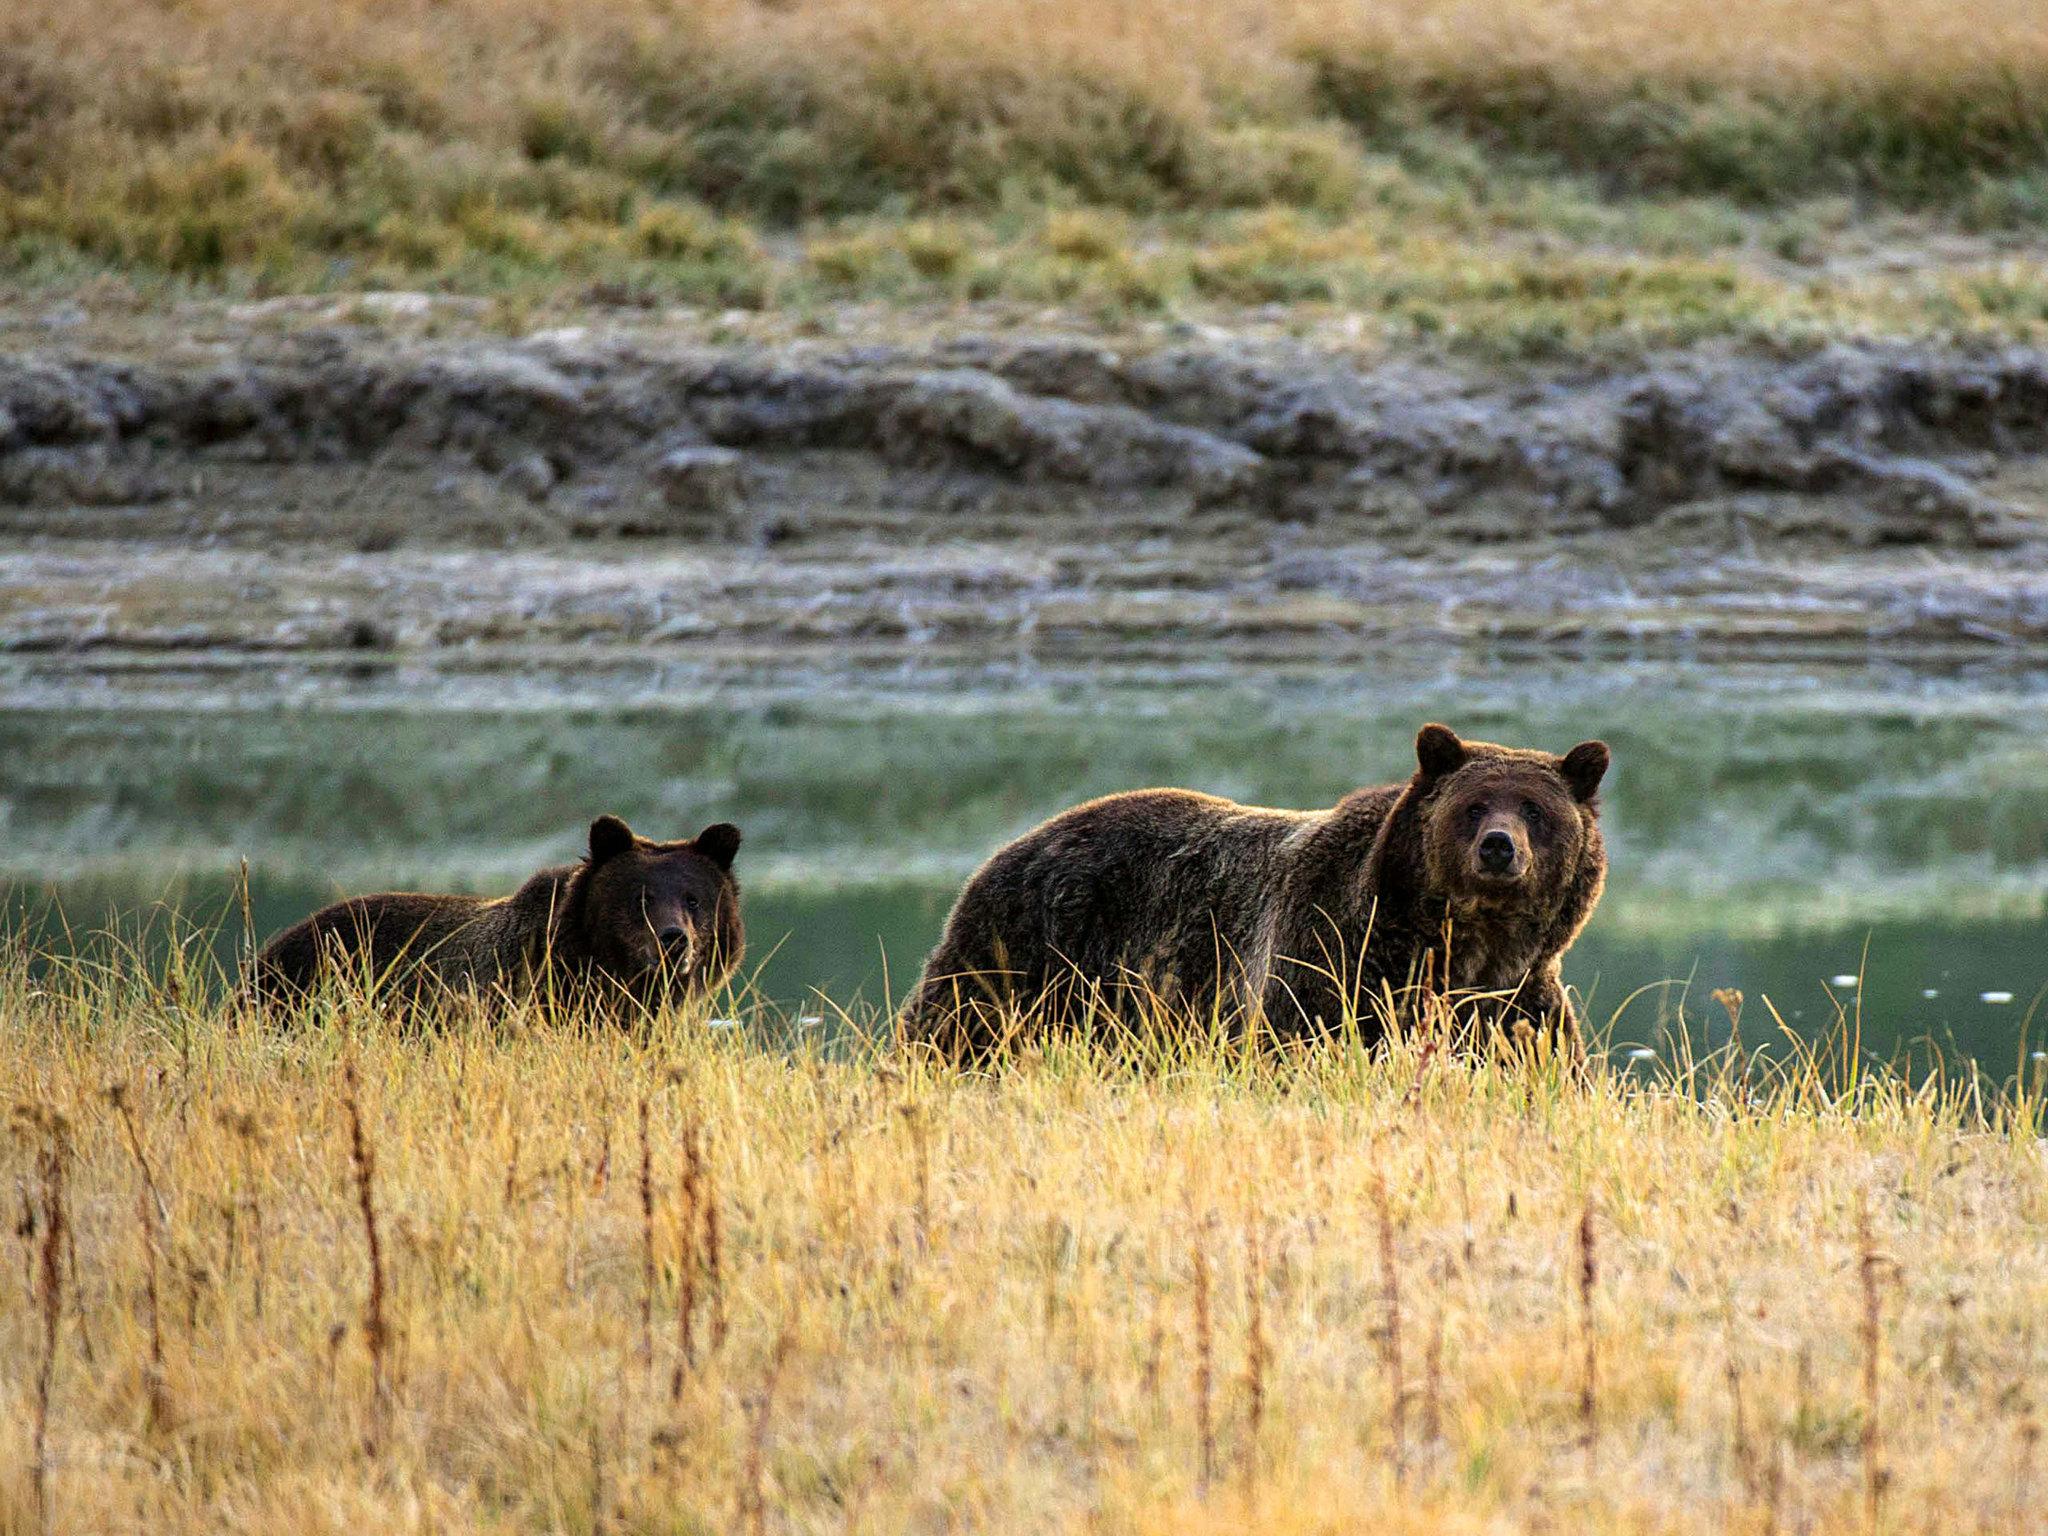 A grizzly mother bear could be killed if DNA proves she killed a hiker in Yellowstone National Park